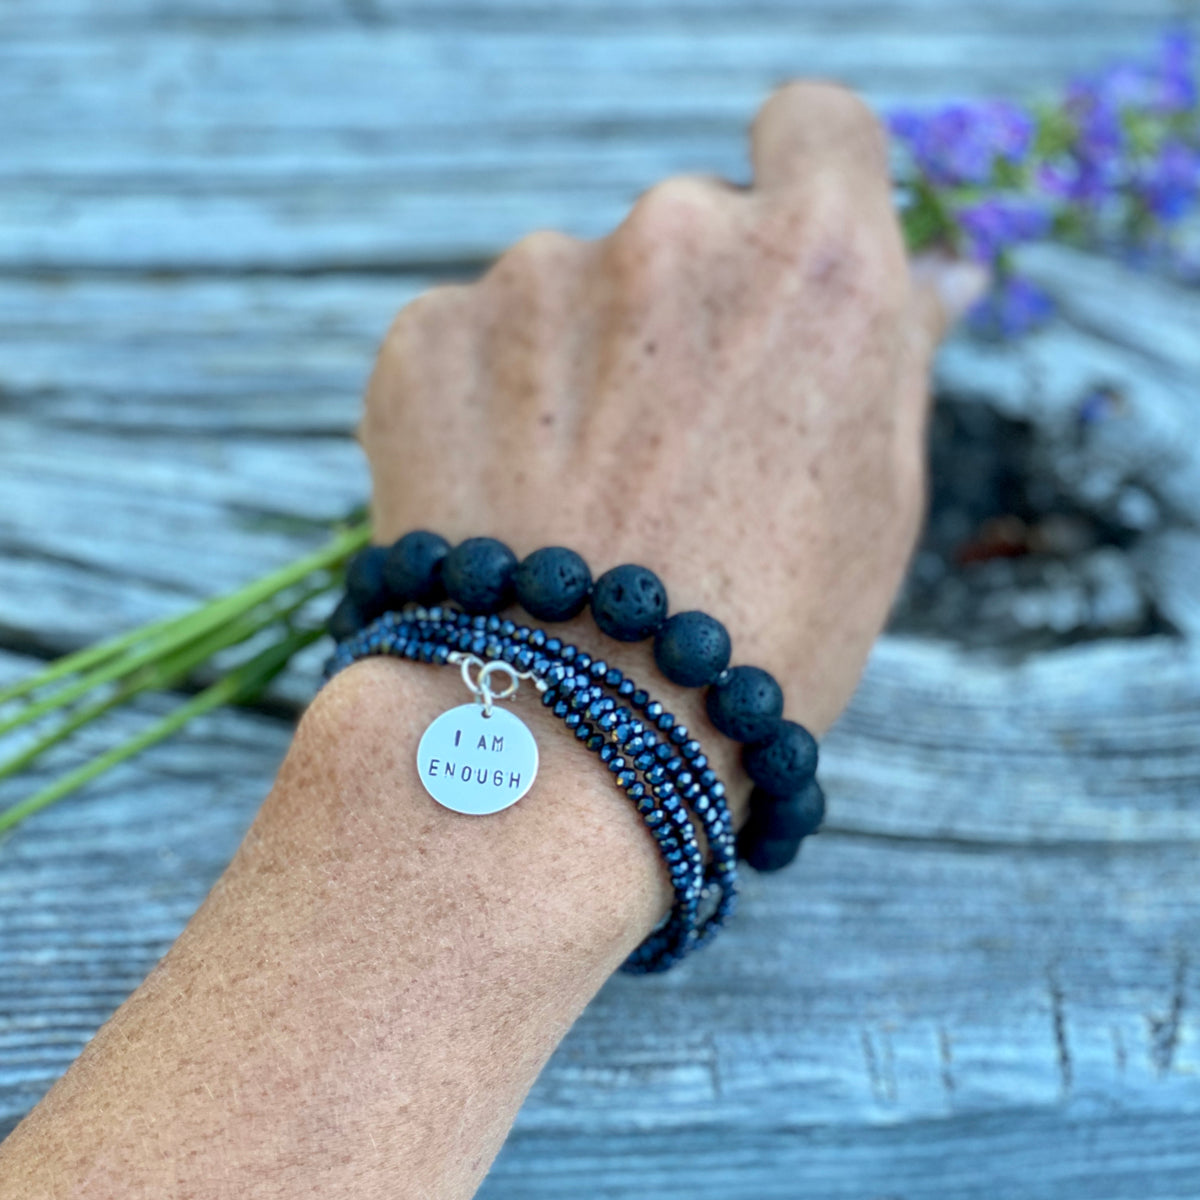 I am Enough - Affirmation Wrap Bracelet Combo with Lava Stone for Aromatherapy